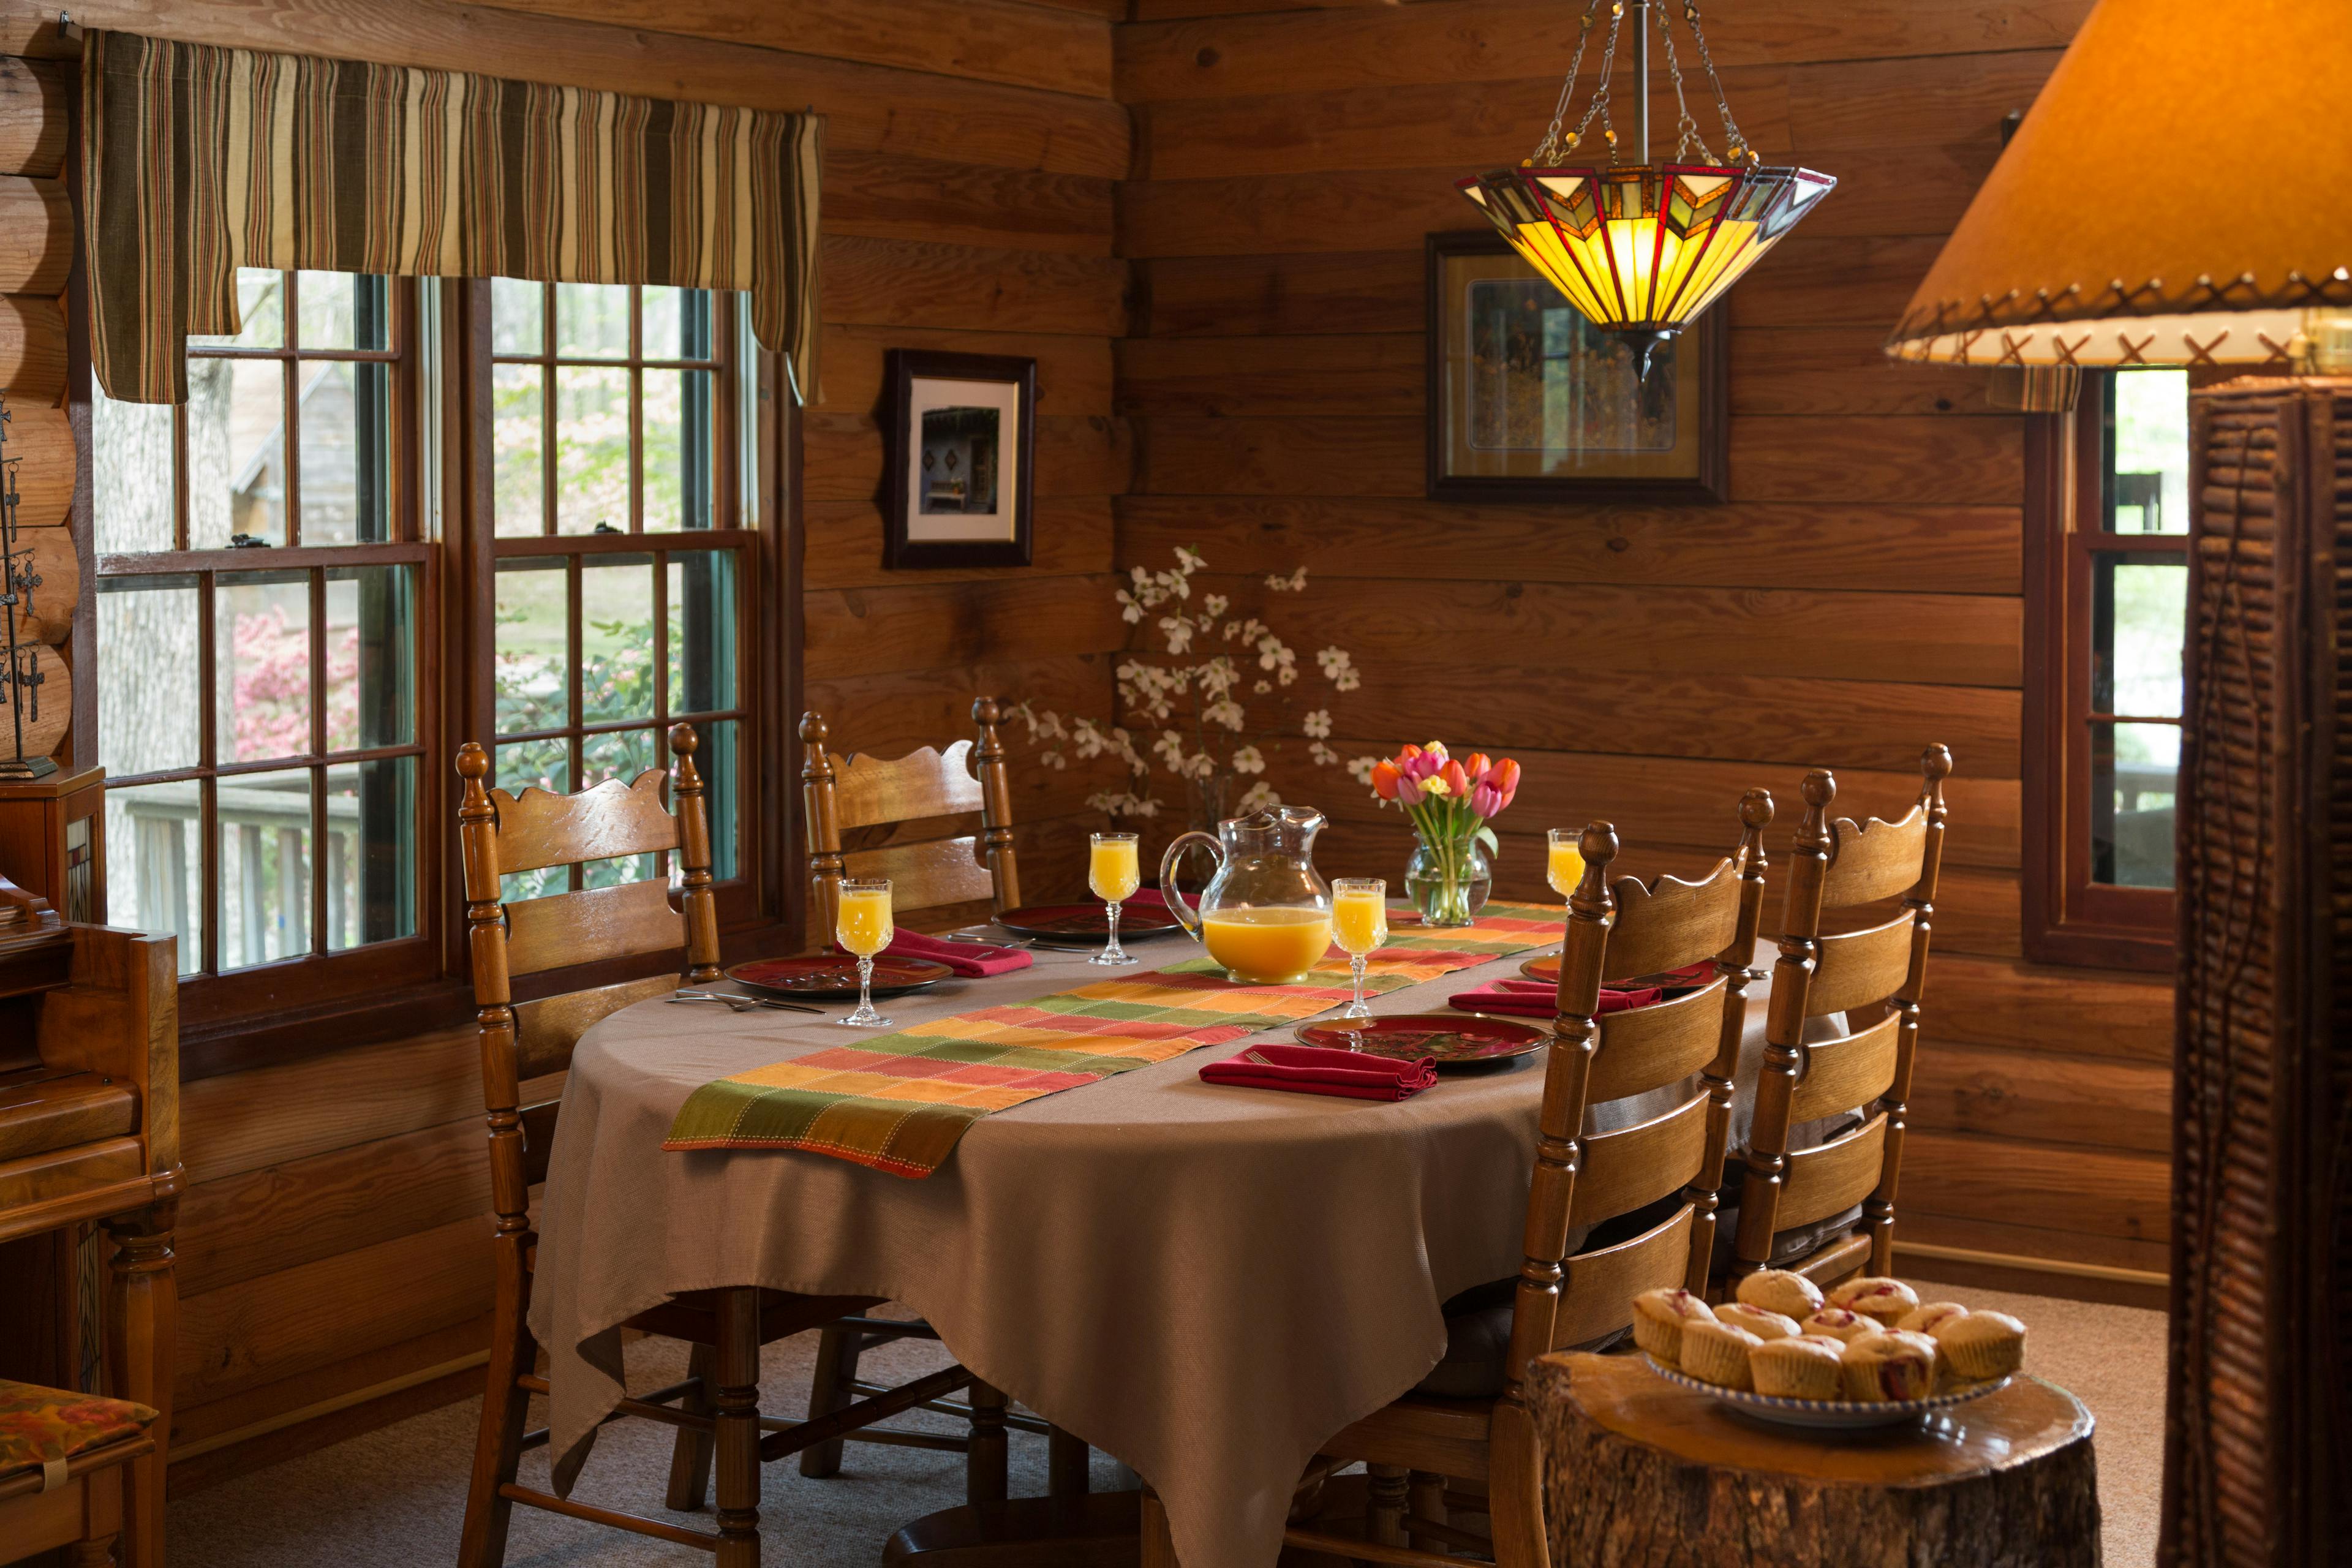 A log dining room with an oval table, brown tablecloth, orange, red and green table runner, red plates and napkins, and glasses full of orange juice, along with wood chairs.